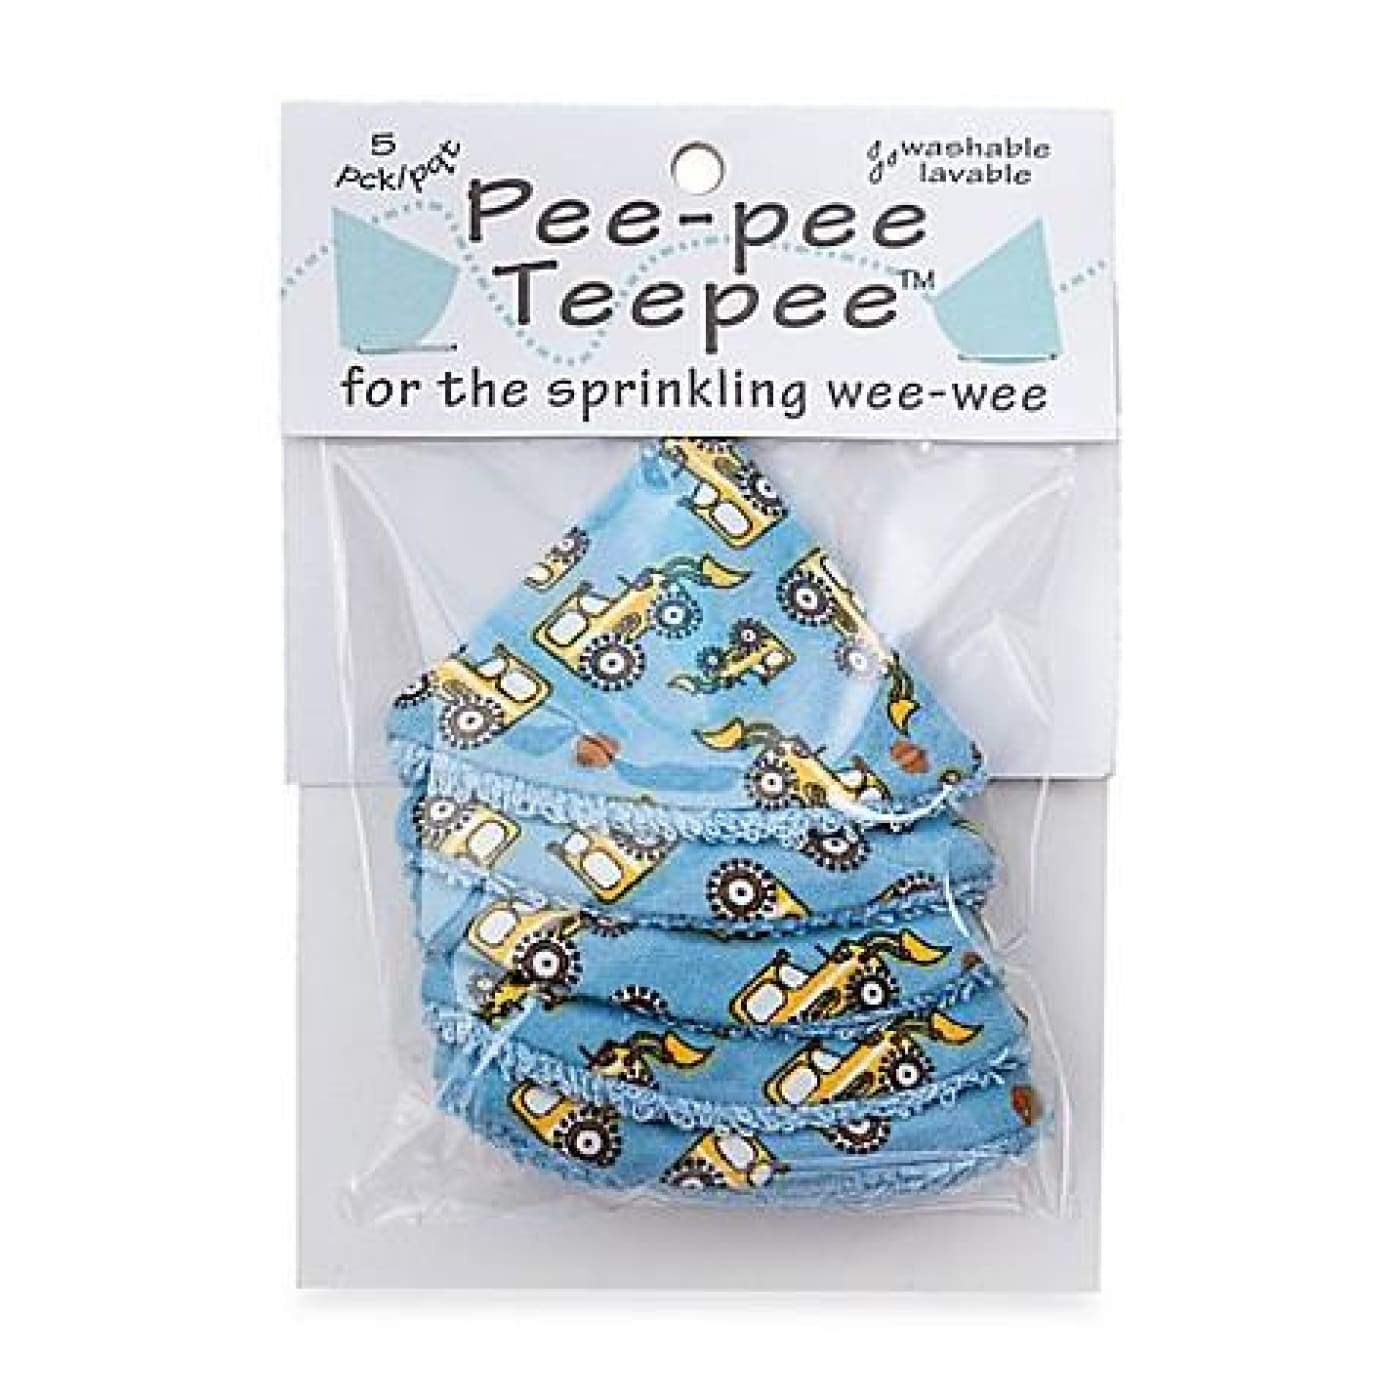 Pee-pee Teepees - Diggers - BATHTIME & CHANGING - NAPPIES/WIPES/ACCESSORIES